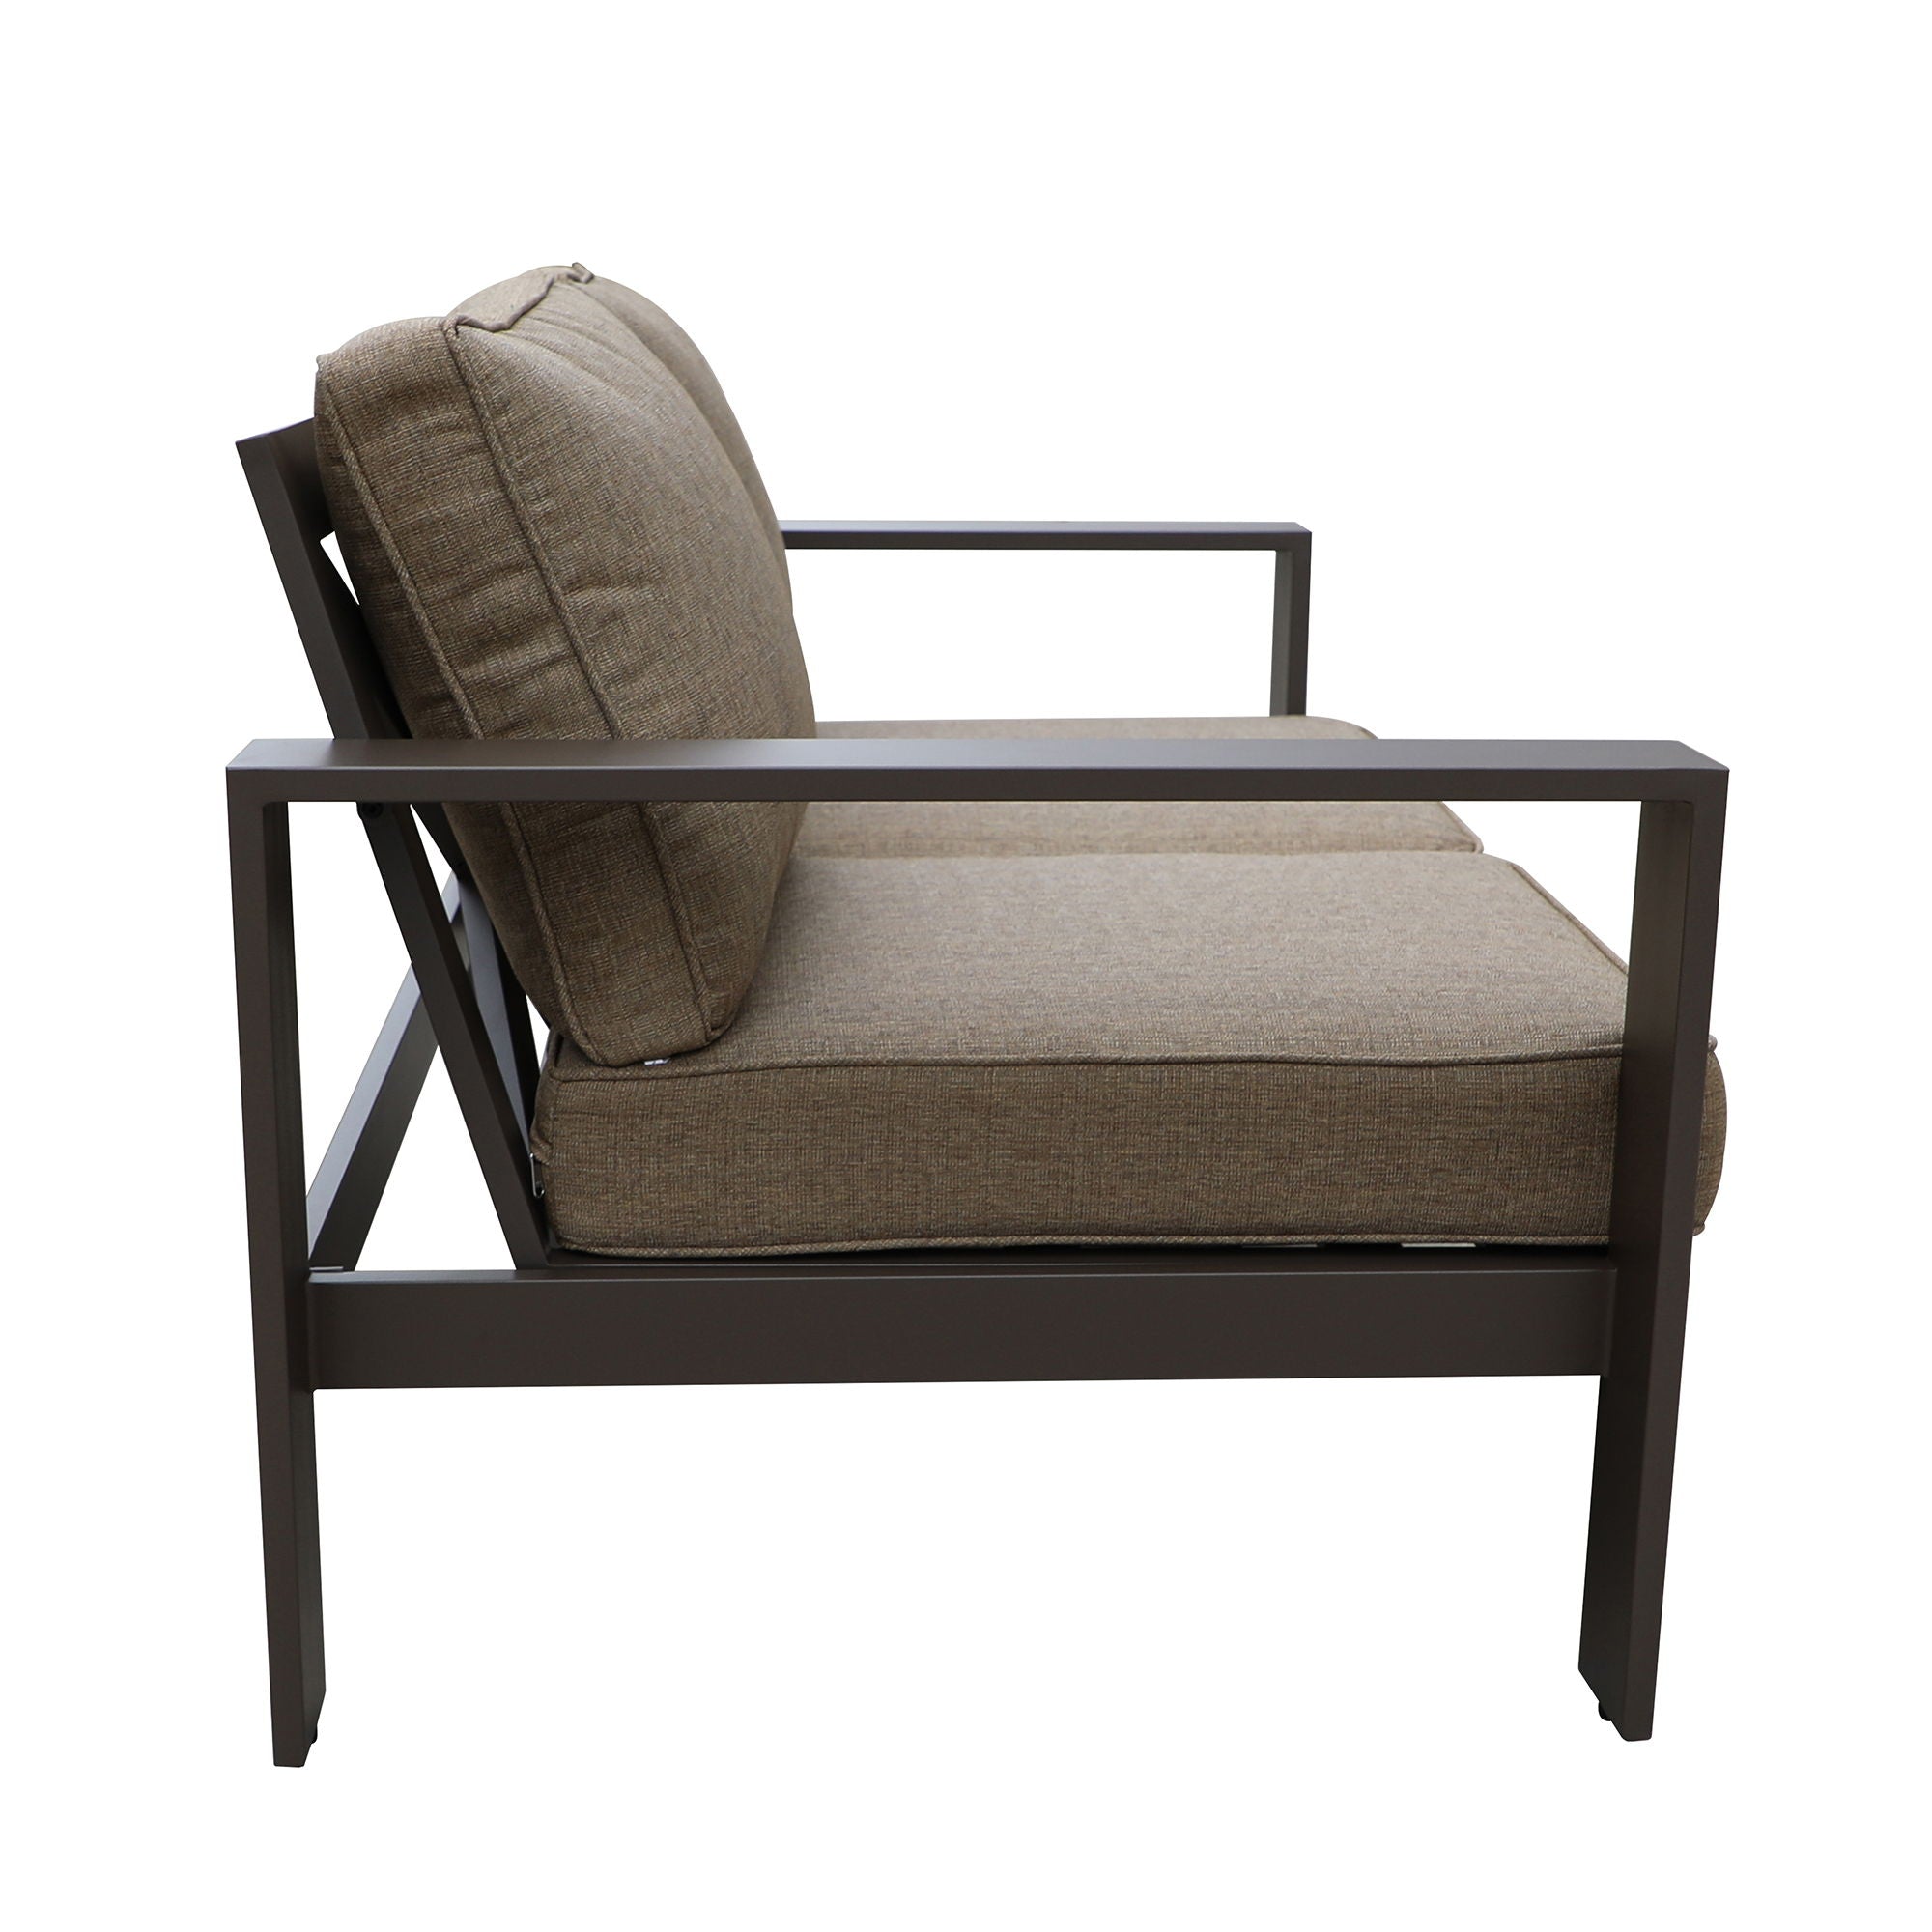 Colorado Outdoor Patio Furniture - Brown Aluminum Framed Garden Loveseat With Chocolate Cushions